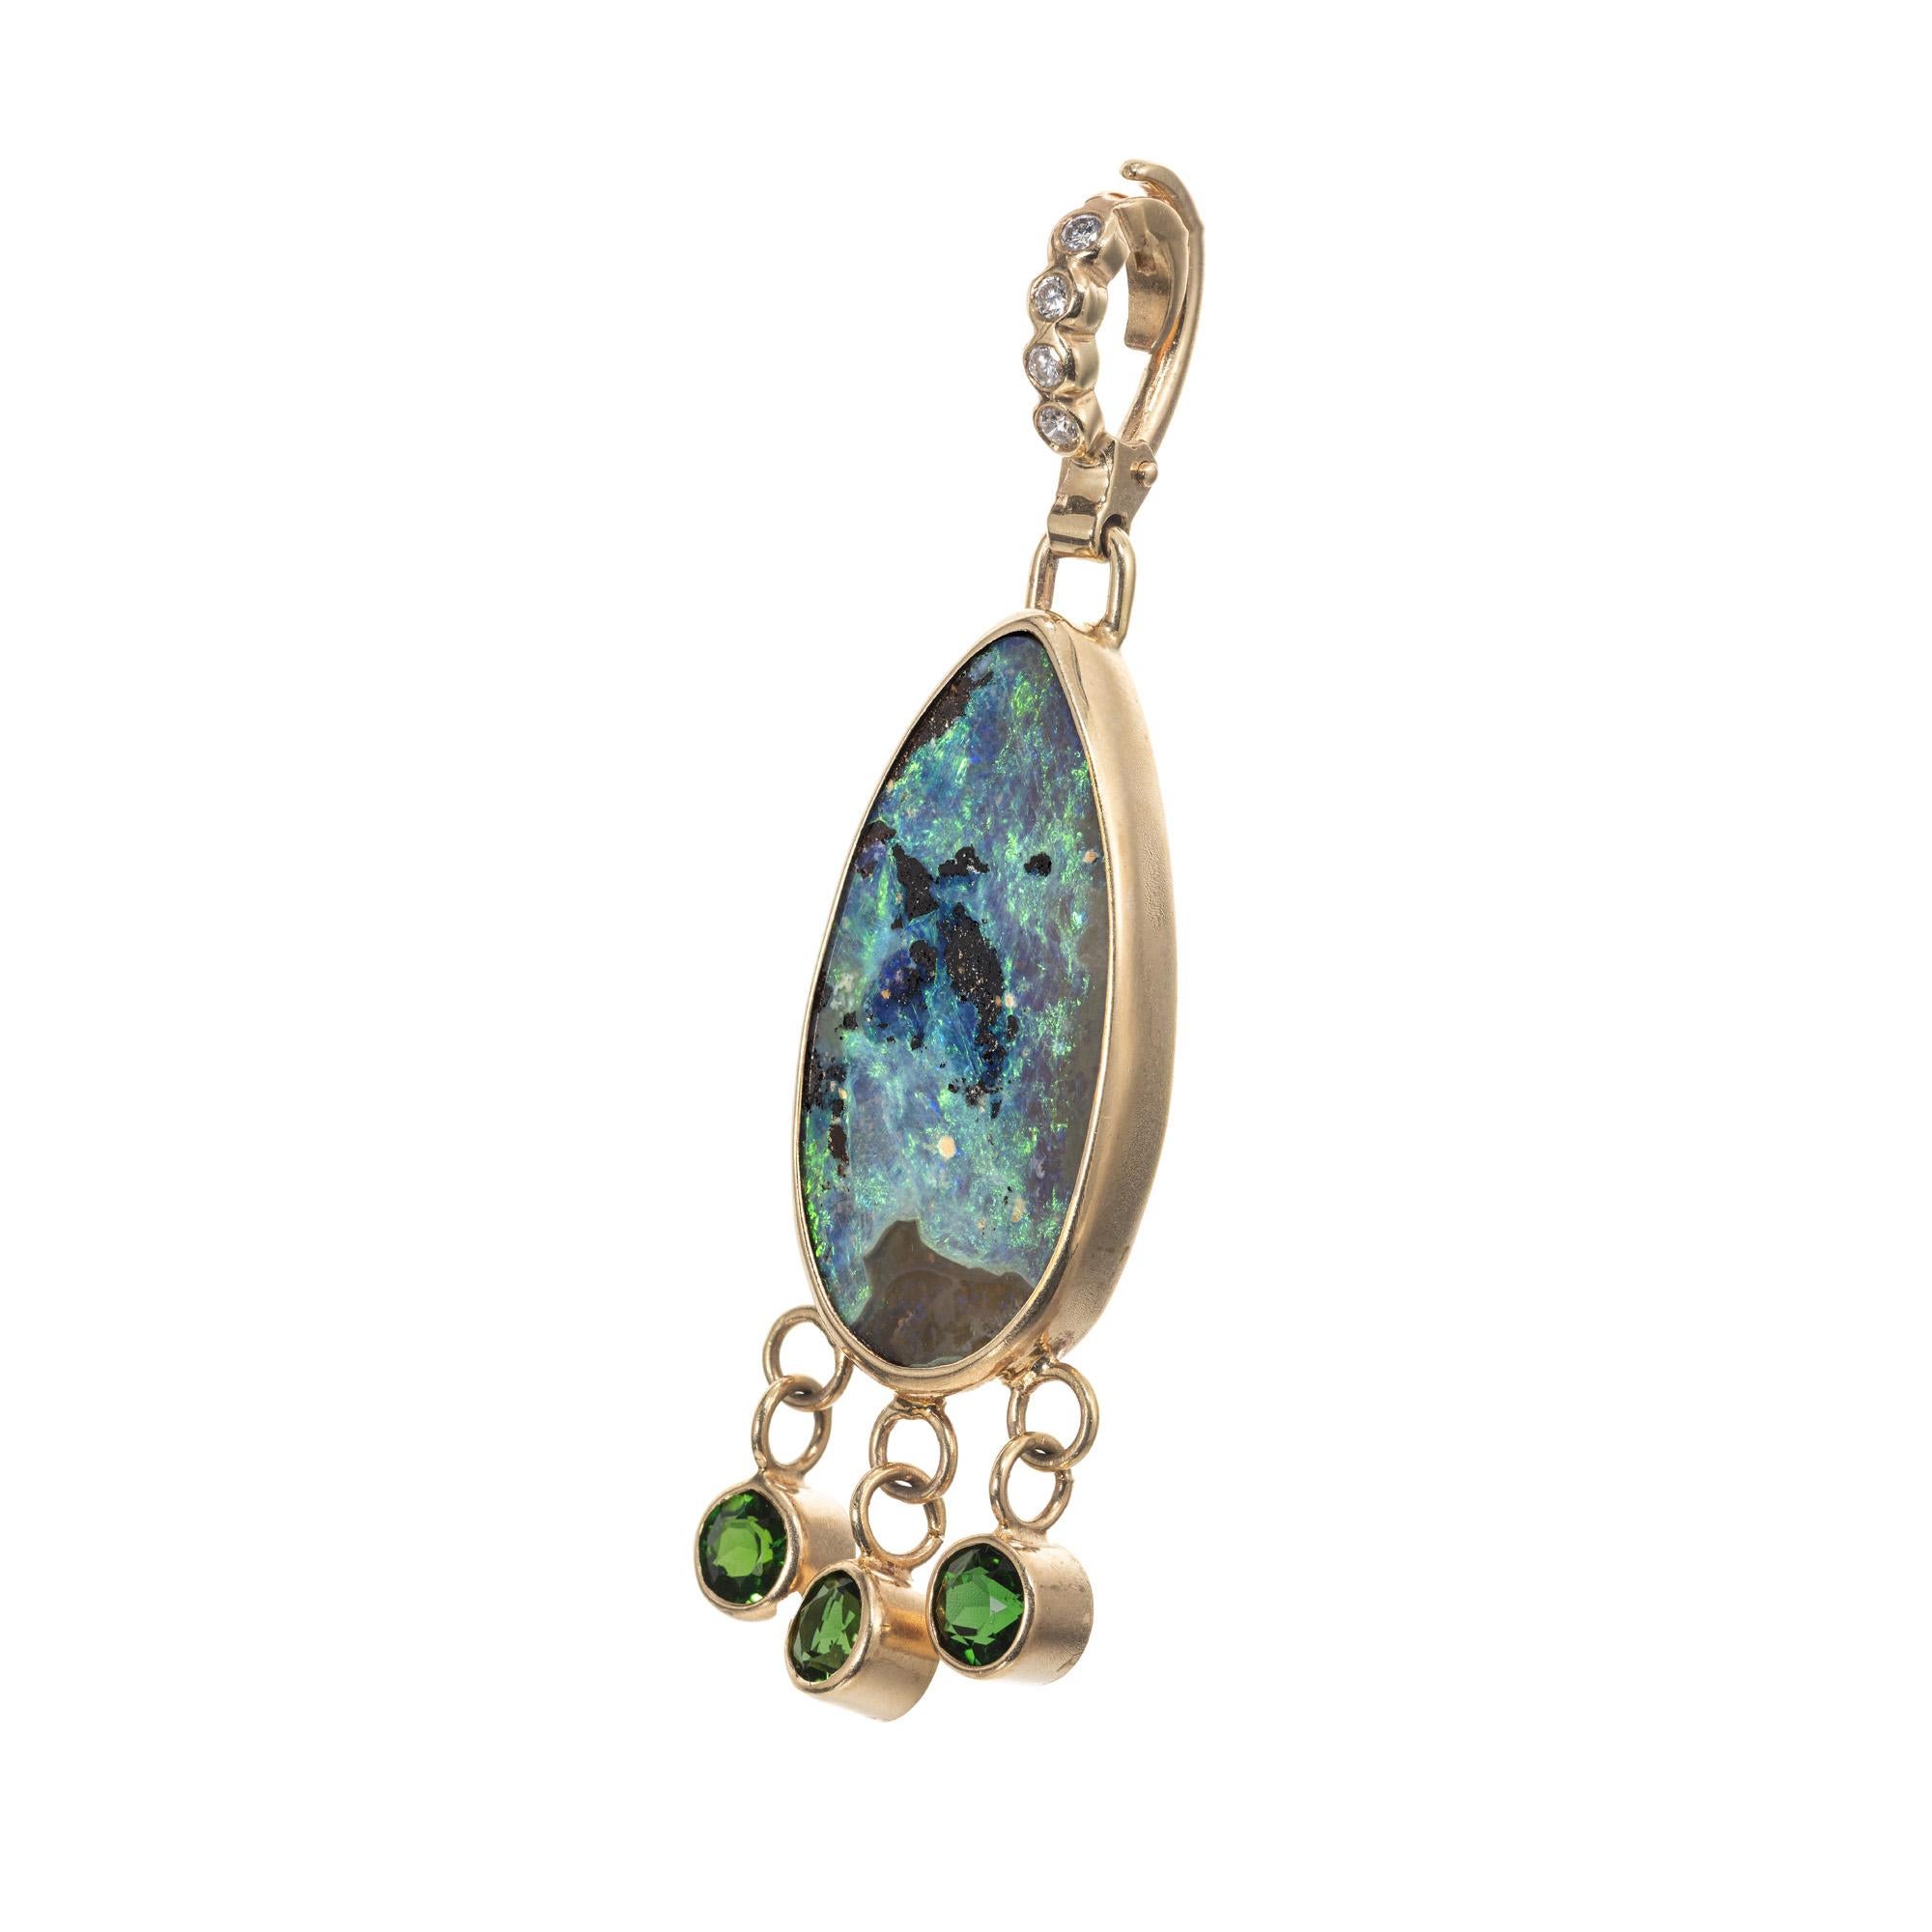 Opal, diamond and tourmaline pendant enhancer. Pear shaped multi color Boulder Opal mounted in a 14k yellow gold bezel frame, accented with three round bezel set deep green tourmalines and four round cut diamonds along the bail. The colors in the